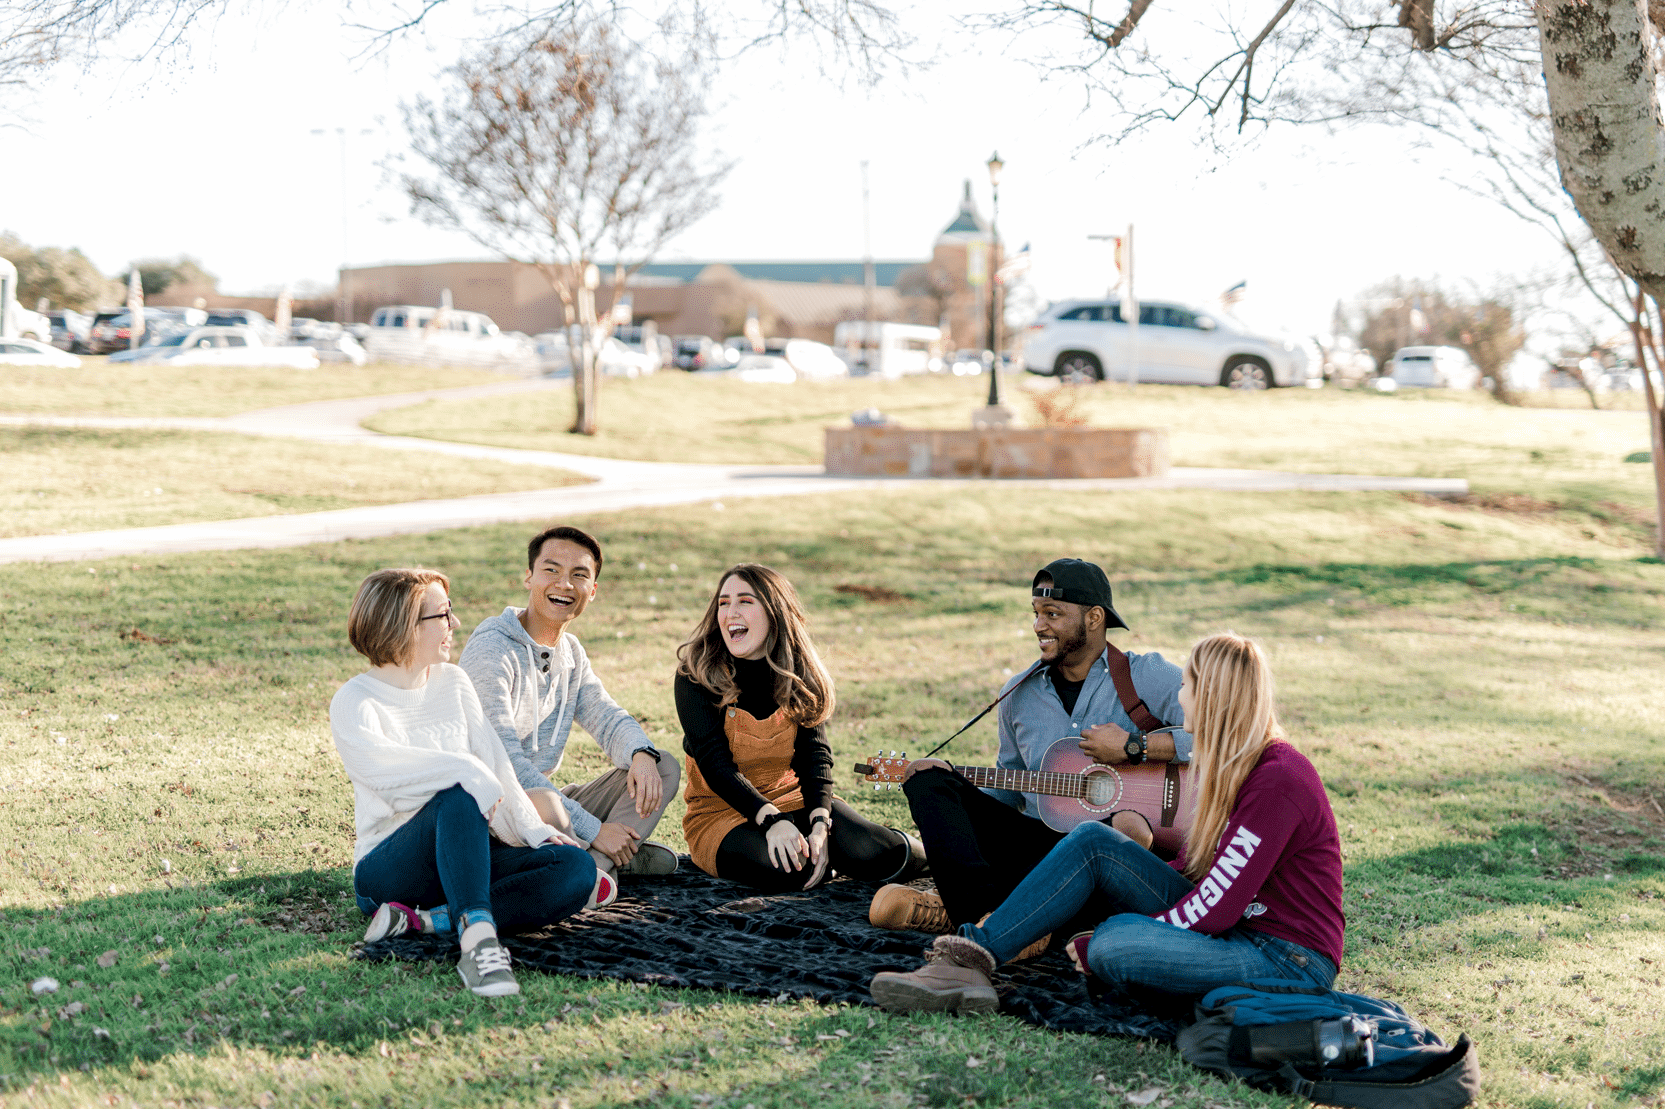 A group of students sit togther smiling and playing guitar on campus on the grass.